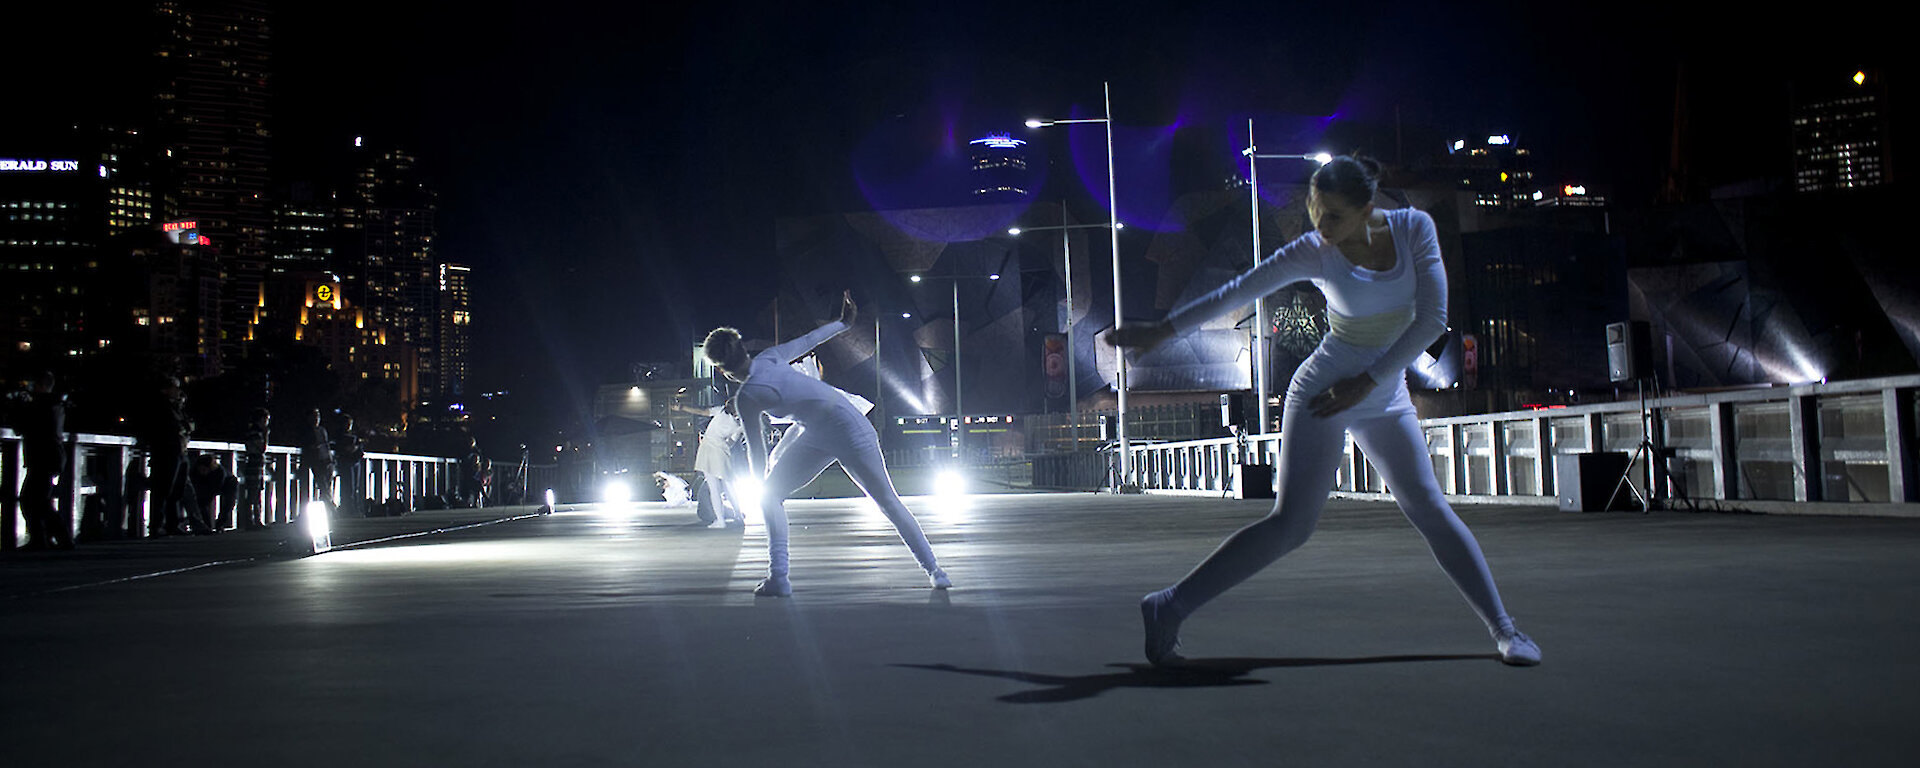 Dancers dressed in white perform ‘Polarity’ in Melbourne’s Federation Square under dramatic lighting